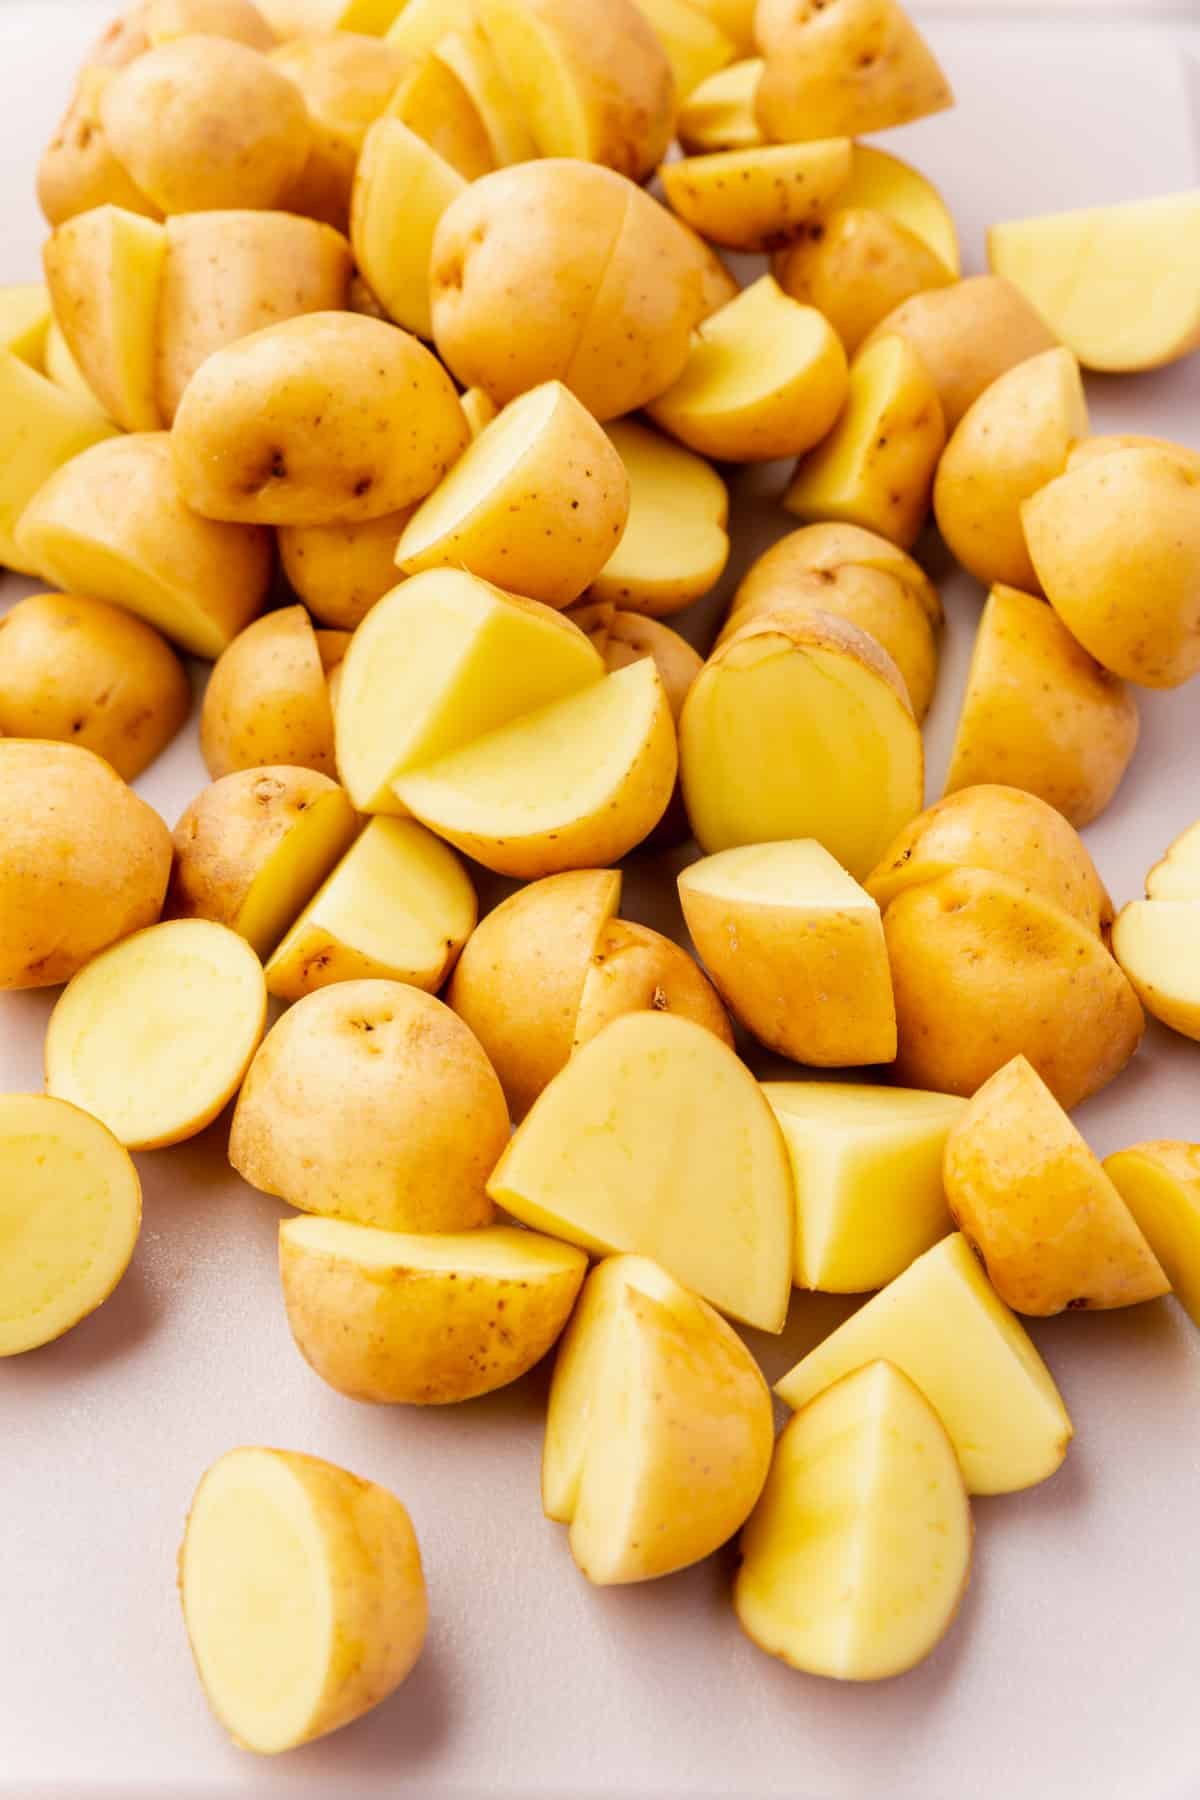 A closeup of baby yukon gold potatoes that have been sliced in half on a cutting board.